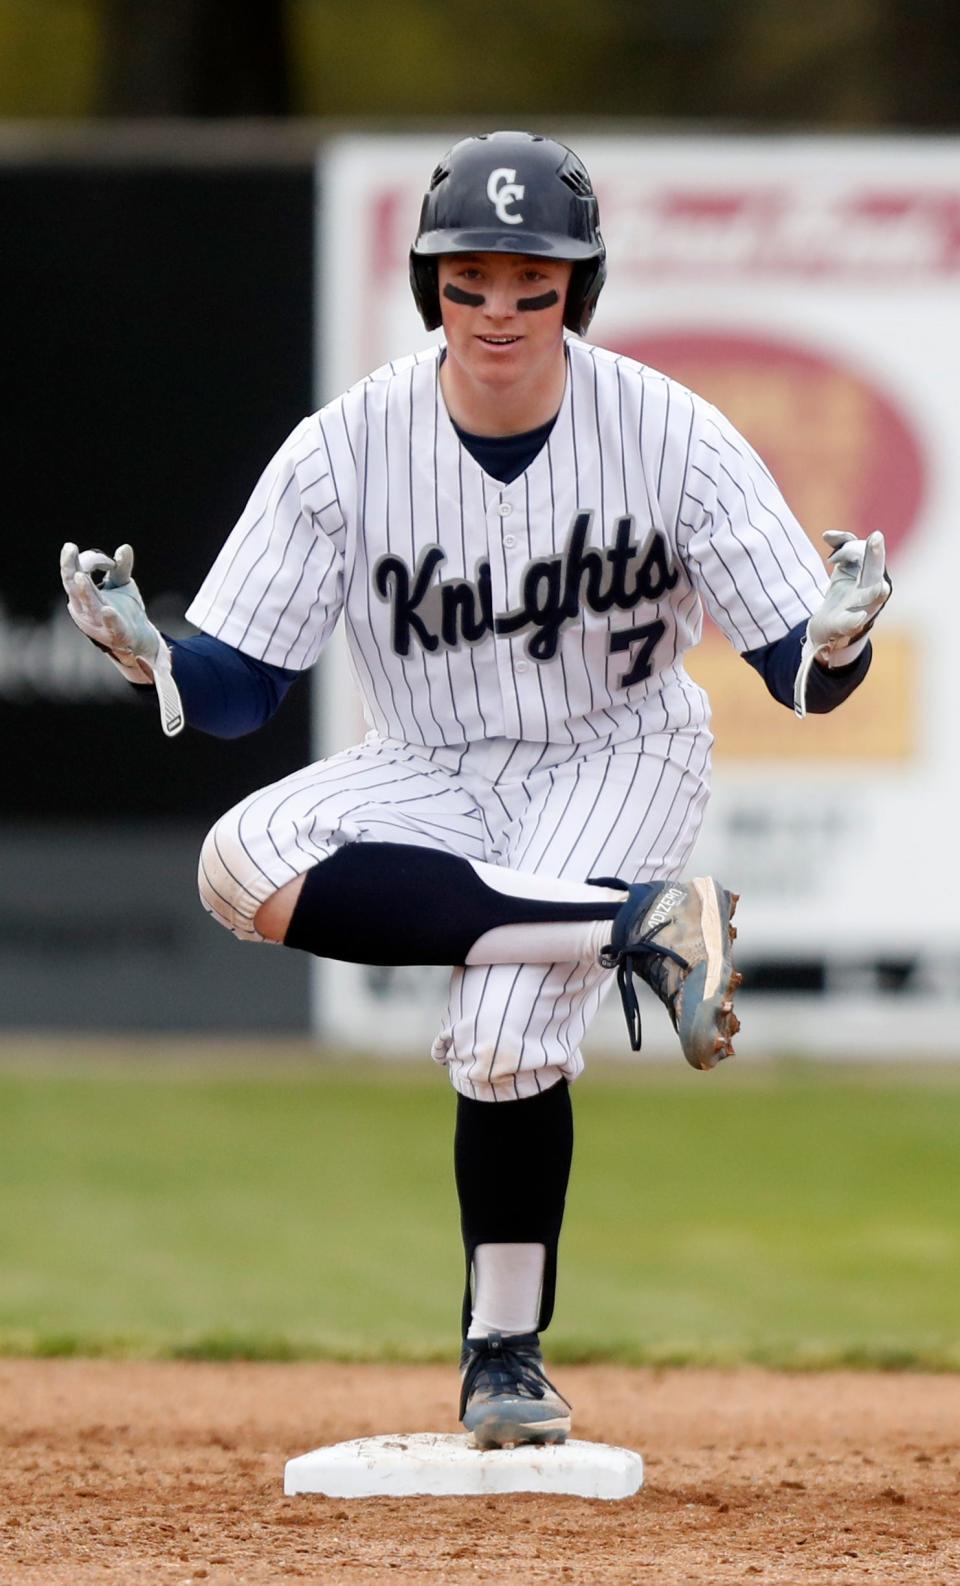 Central Catholic Knights Ryan Schummer (7) celebrates after getting a hit during the IHSAA baseball game against the Rossville Hornets, Friday, April 28, 2023, at Central Catholic High School in Lafayette, Ind. Central Catholic won 9-3.